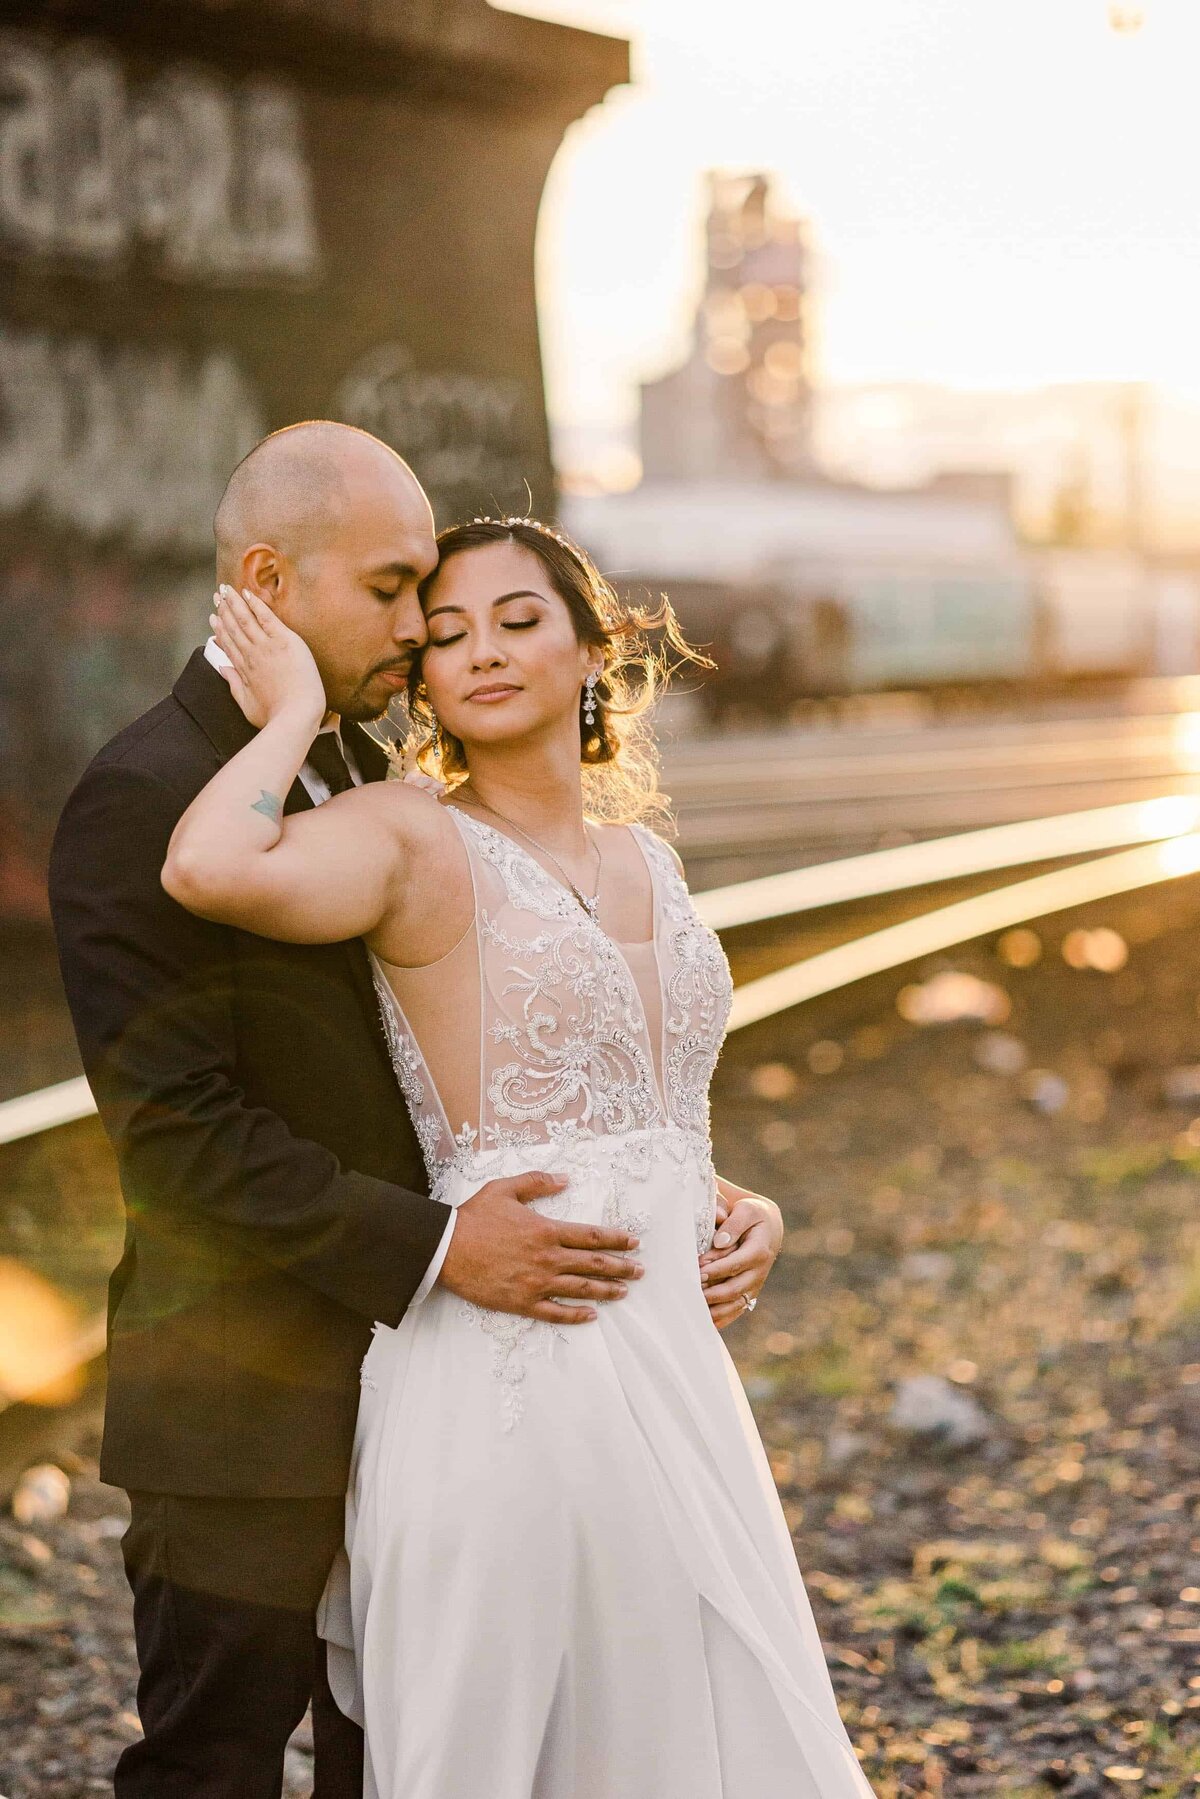 Bride and groom snuggled nice and close, with the sunset, falling over the train tracks in the background in South Seattle